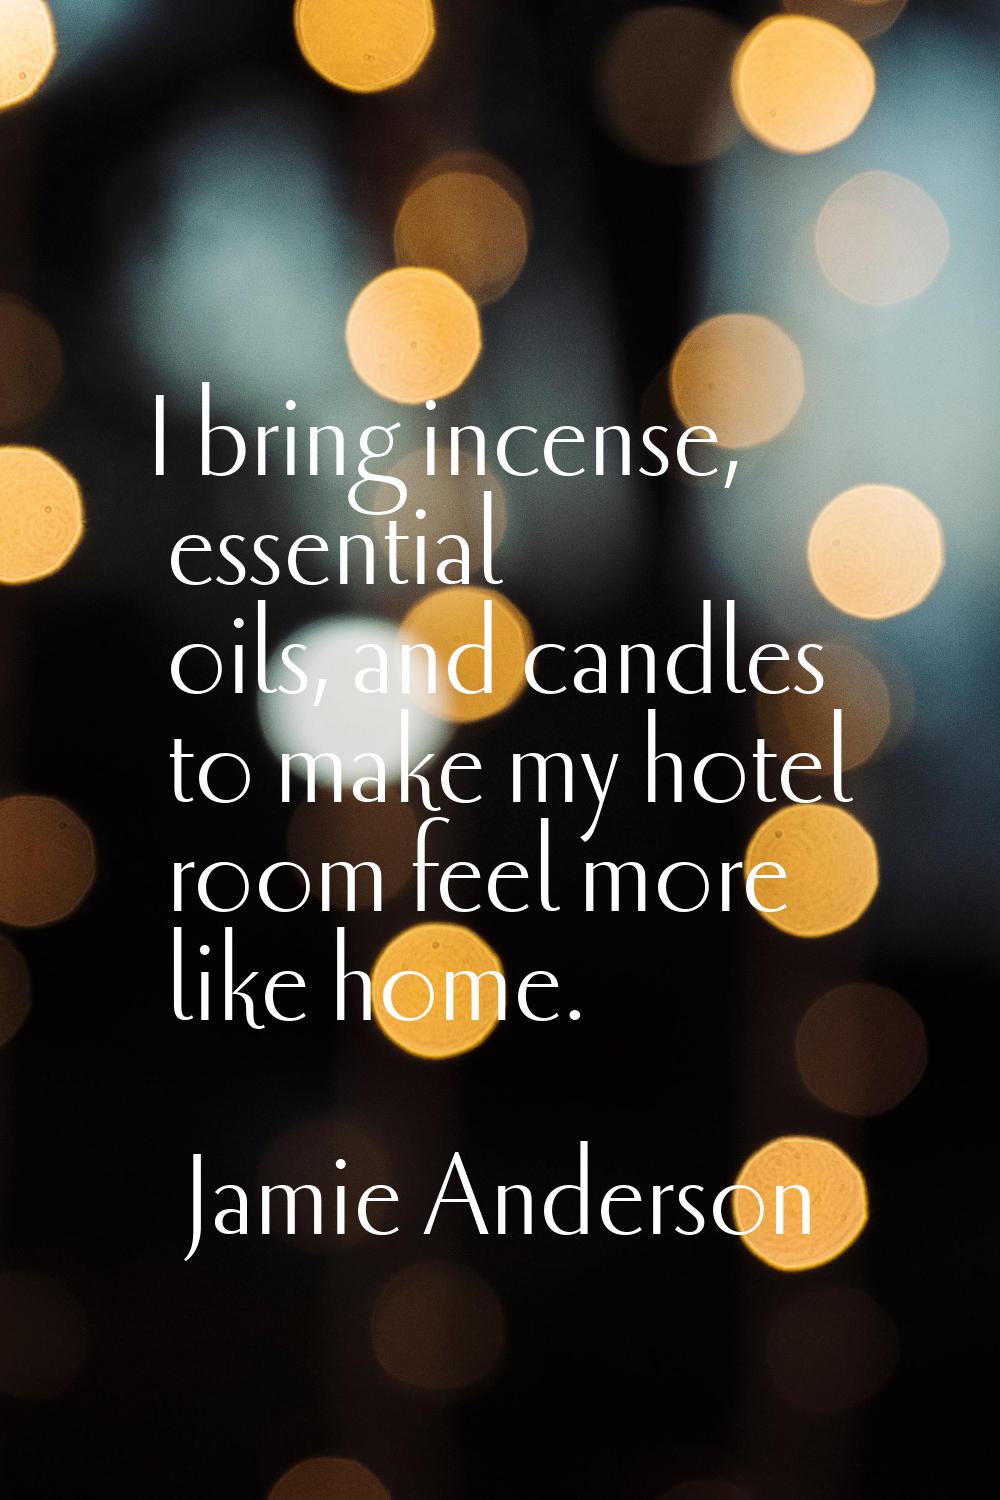 I bring incense, essential oils, and candles to make my hotel room feel more like home.